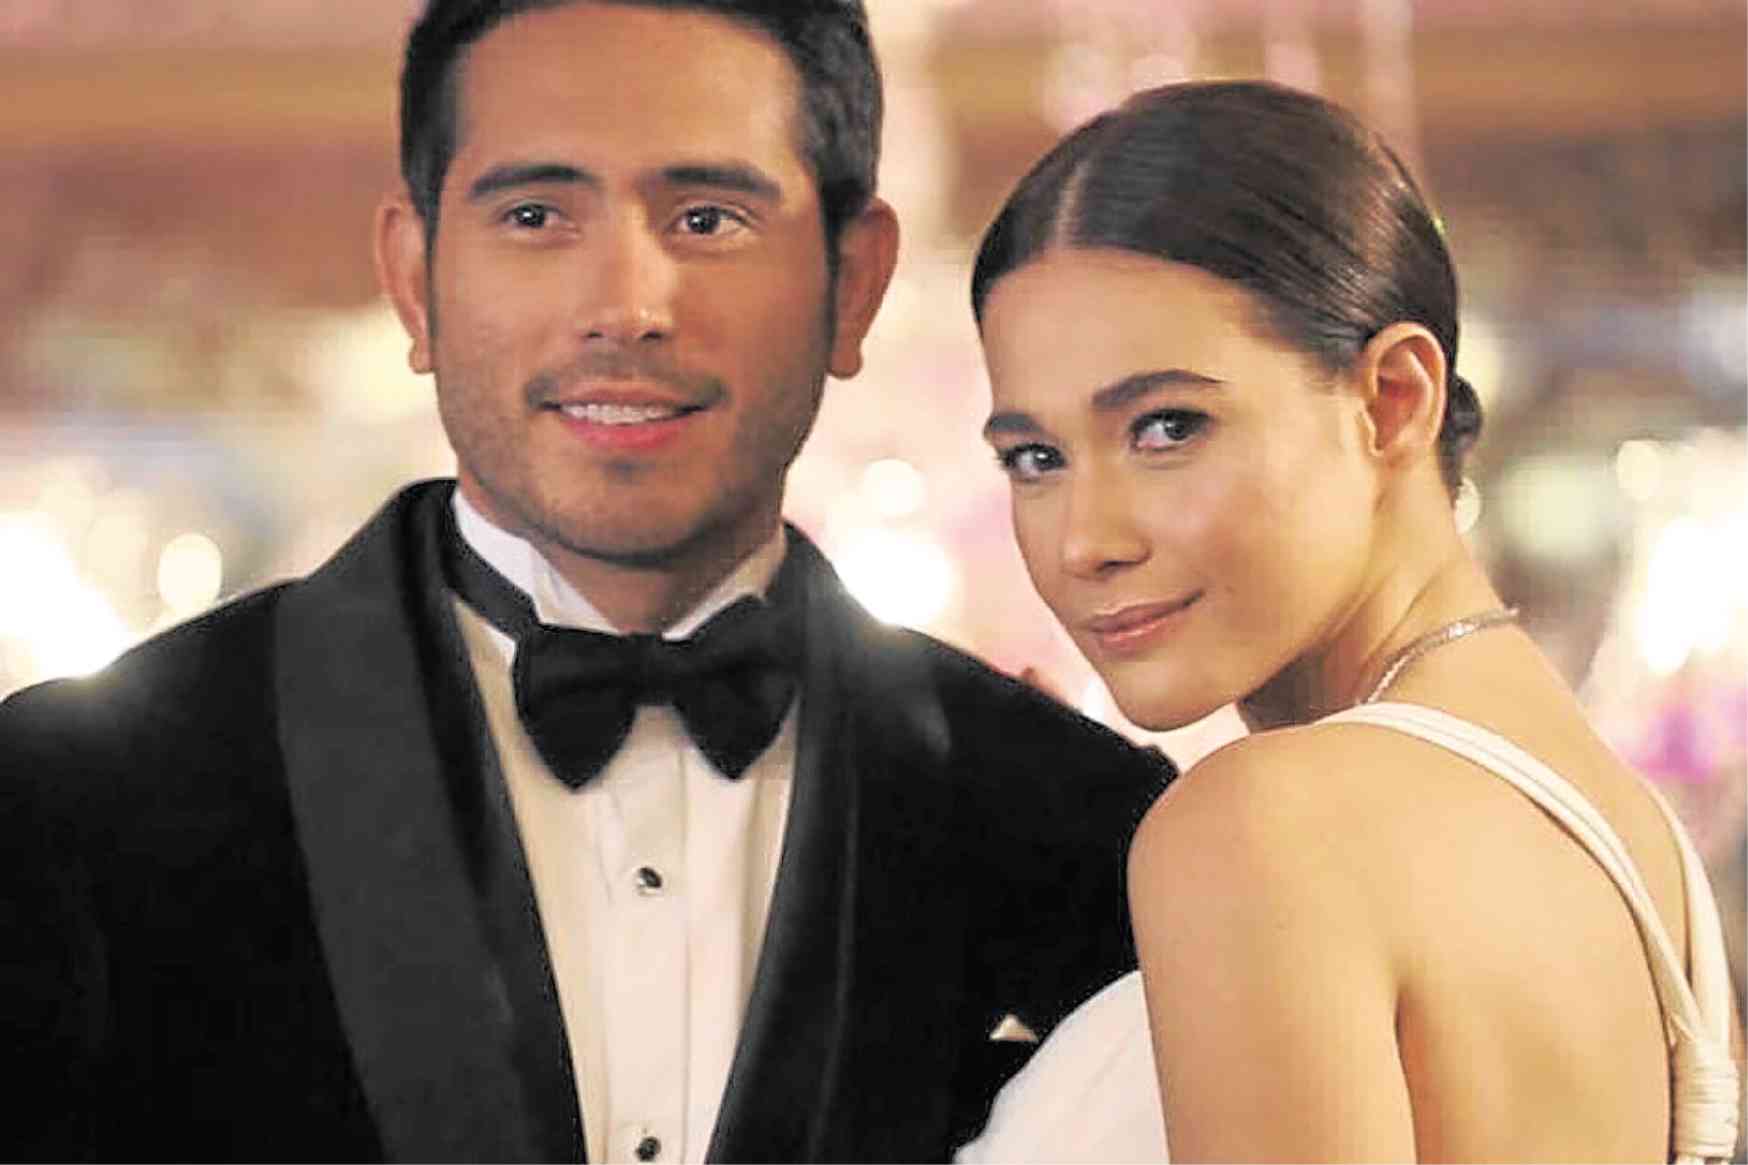 Gerald speaks up on split with Bea: ‘No one else was the reason’